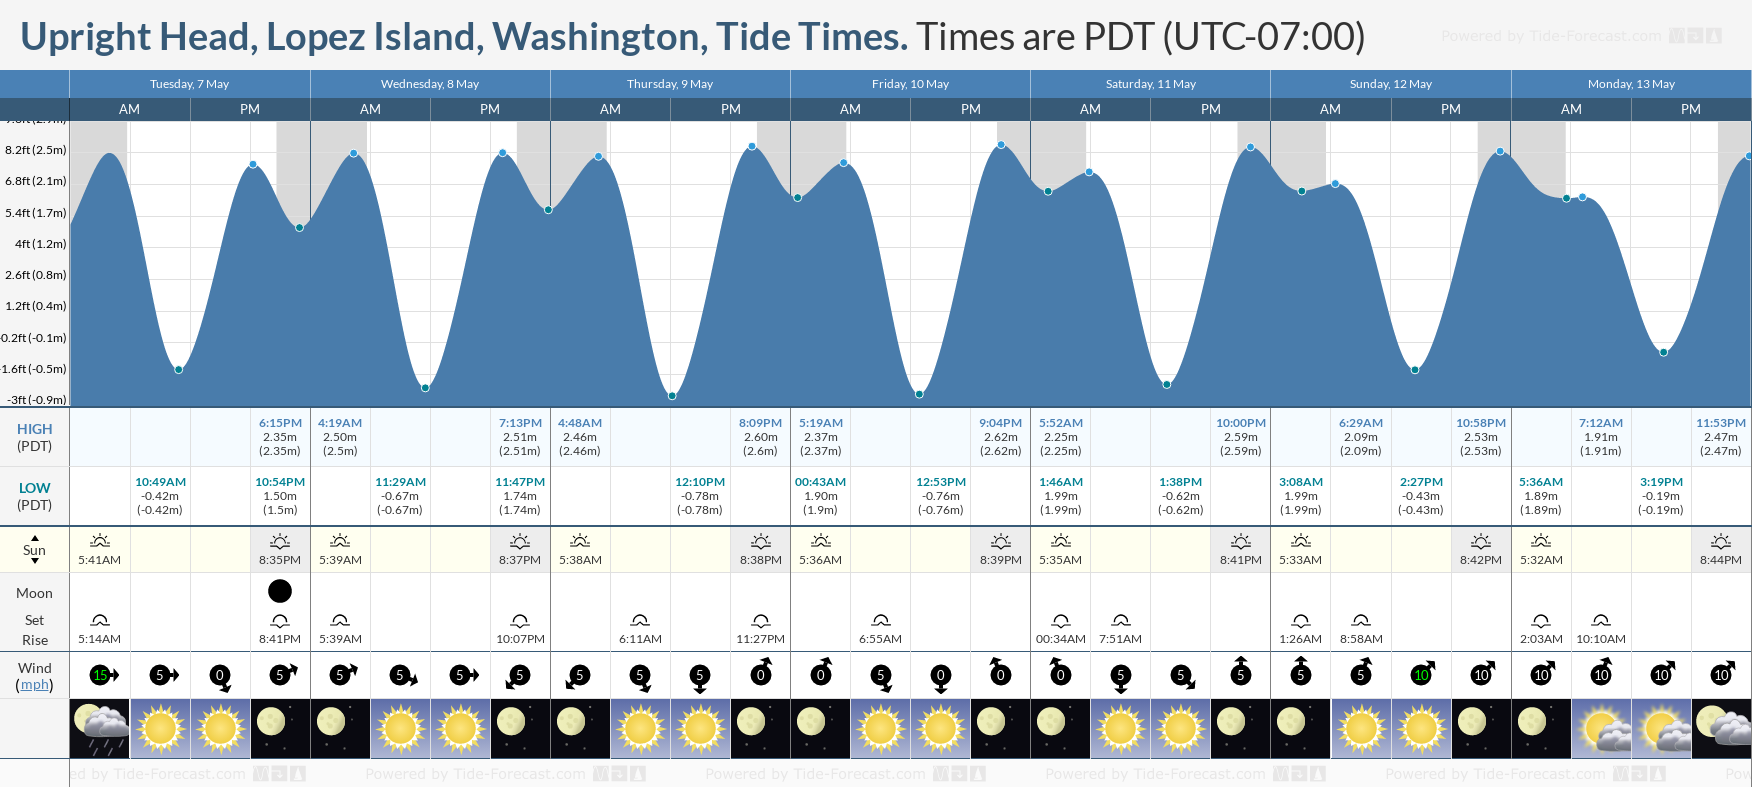 Upright Head, Lopez Island, Washington Tide Chart including high and low tide tide times for the next 7 days